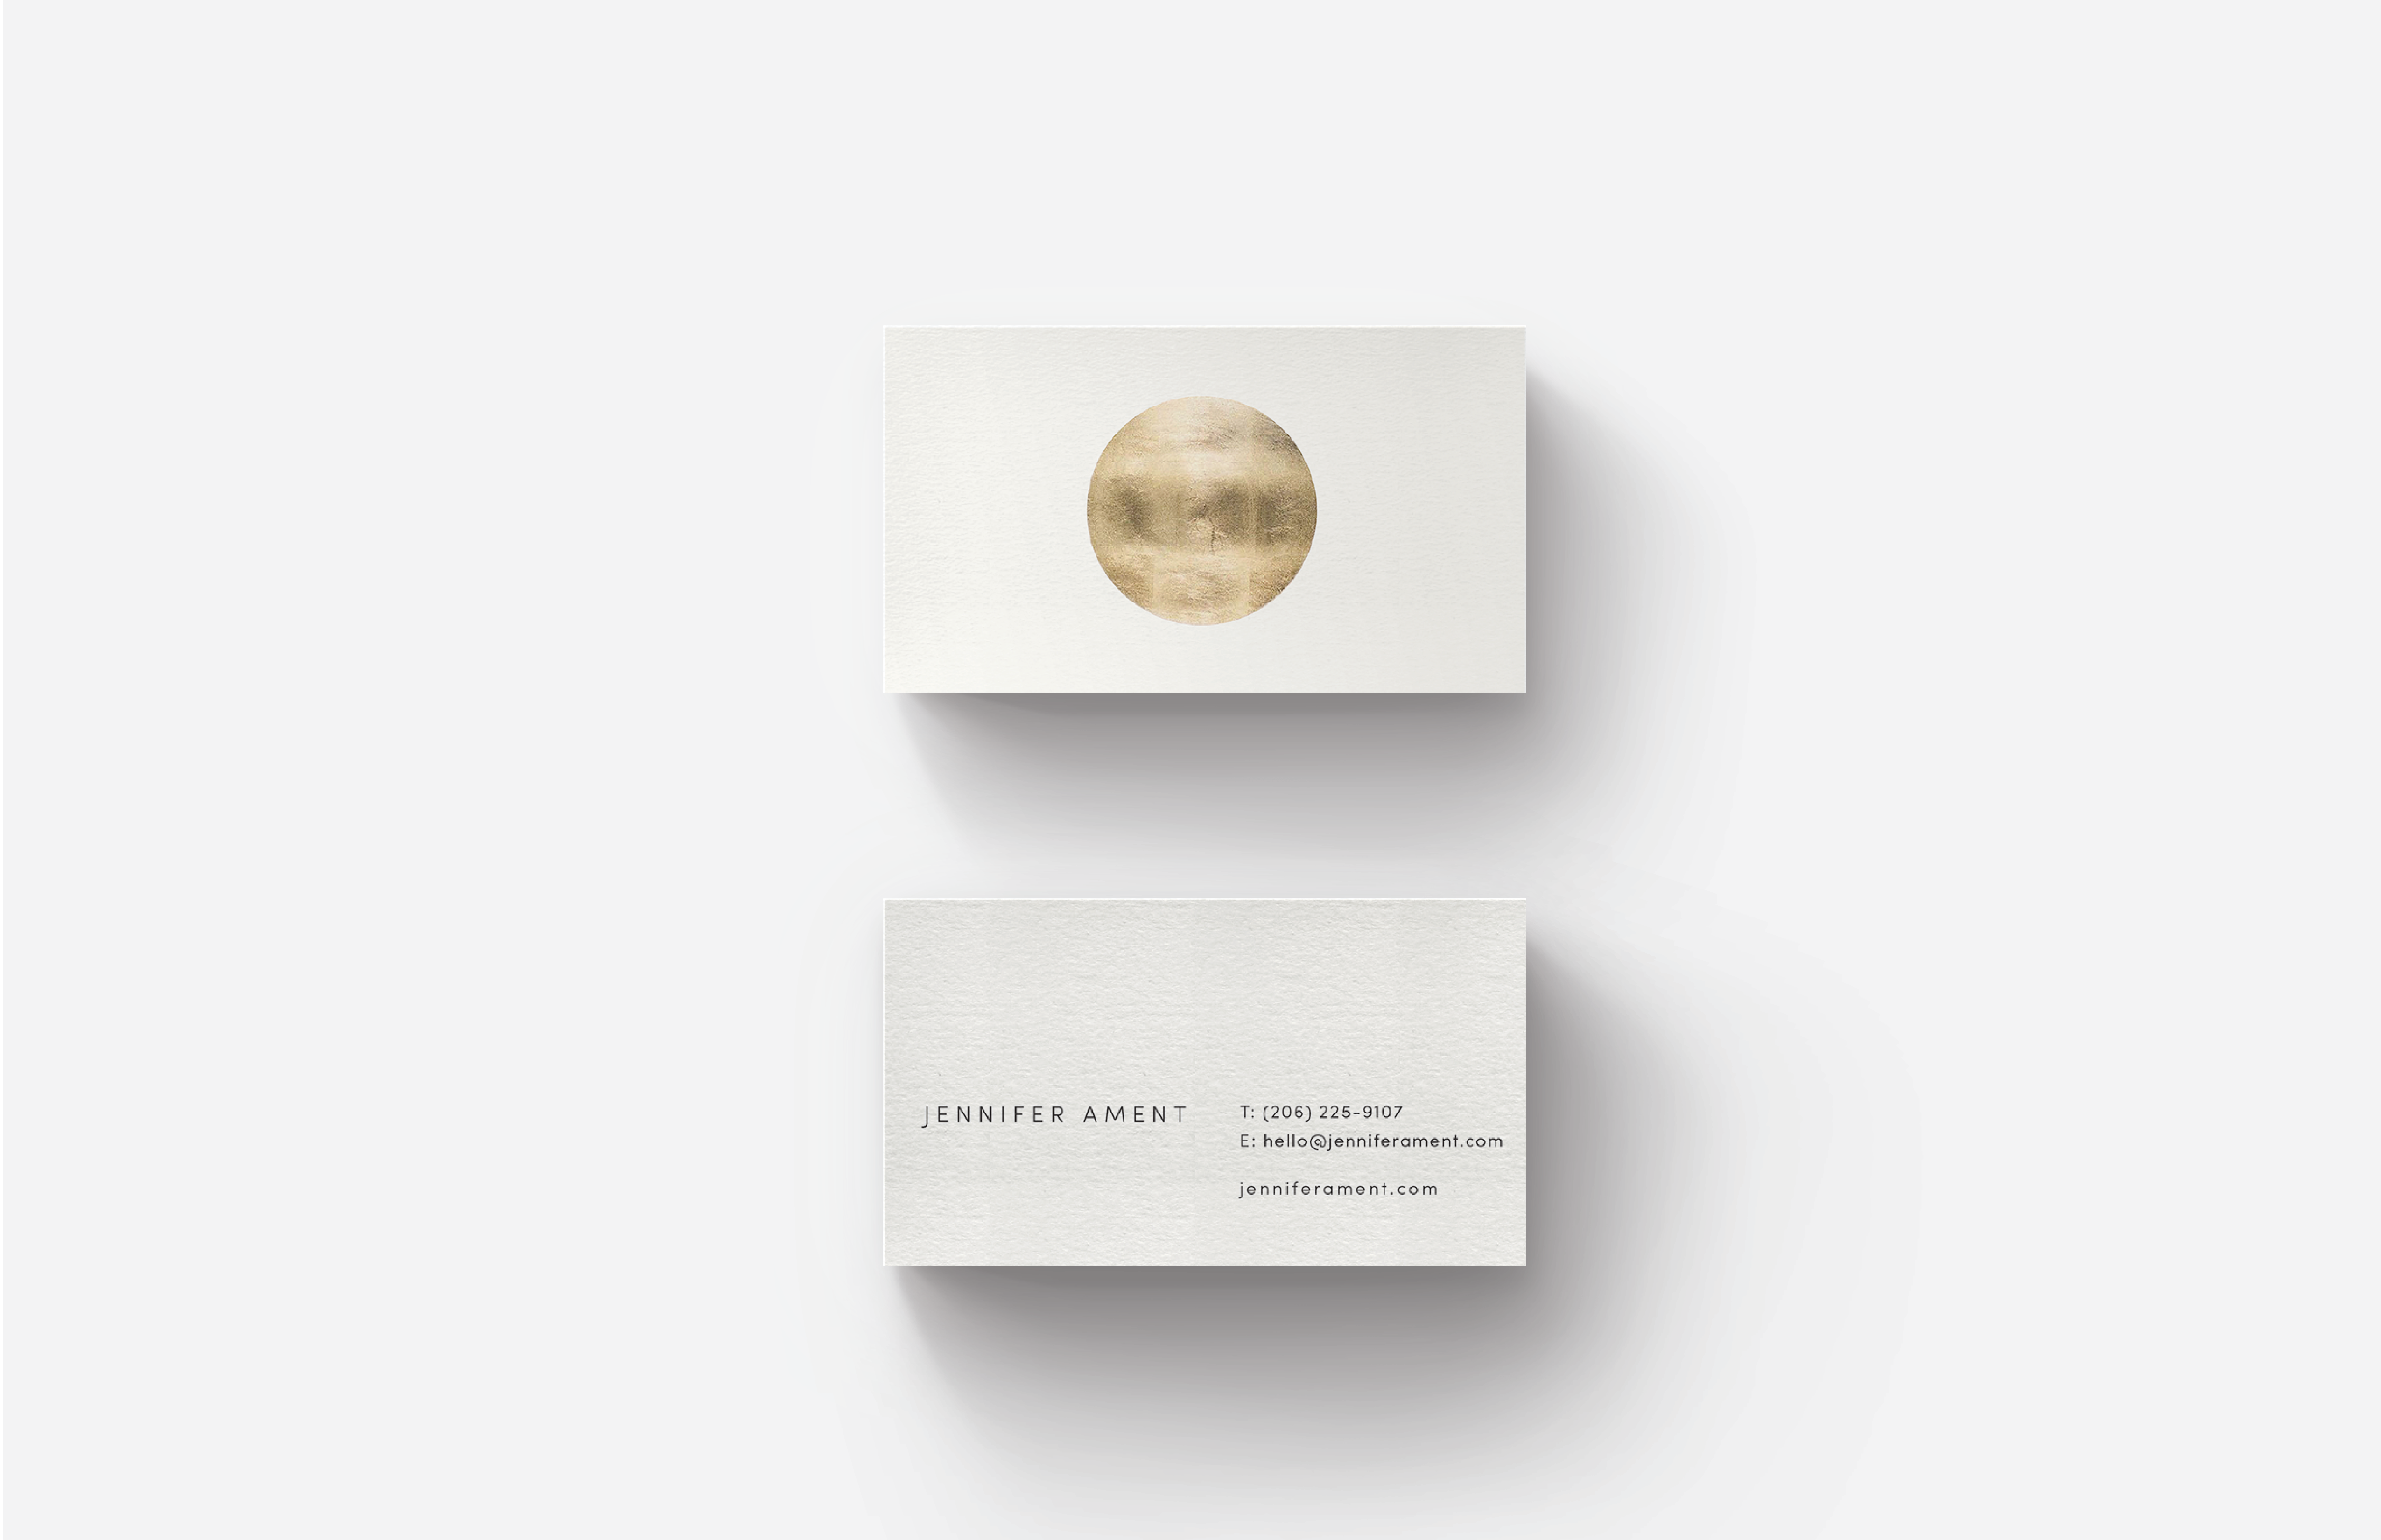 Business cards for Jennifer Ament, an artist and print maker that strives to create paintings that are immersive experiences.